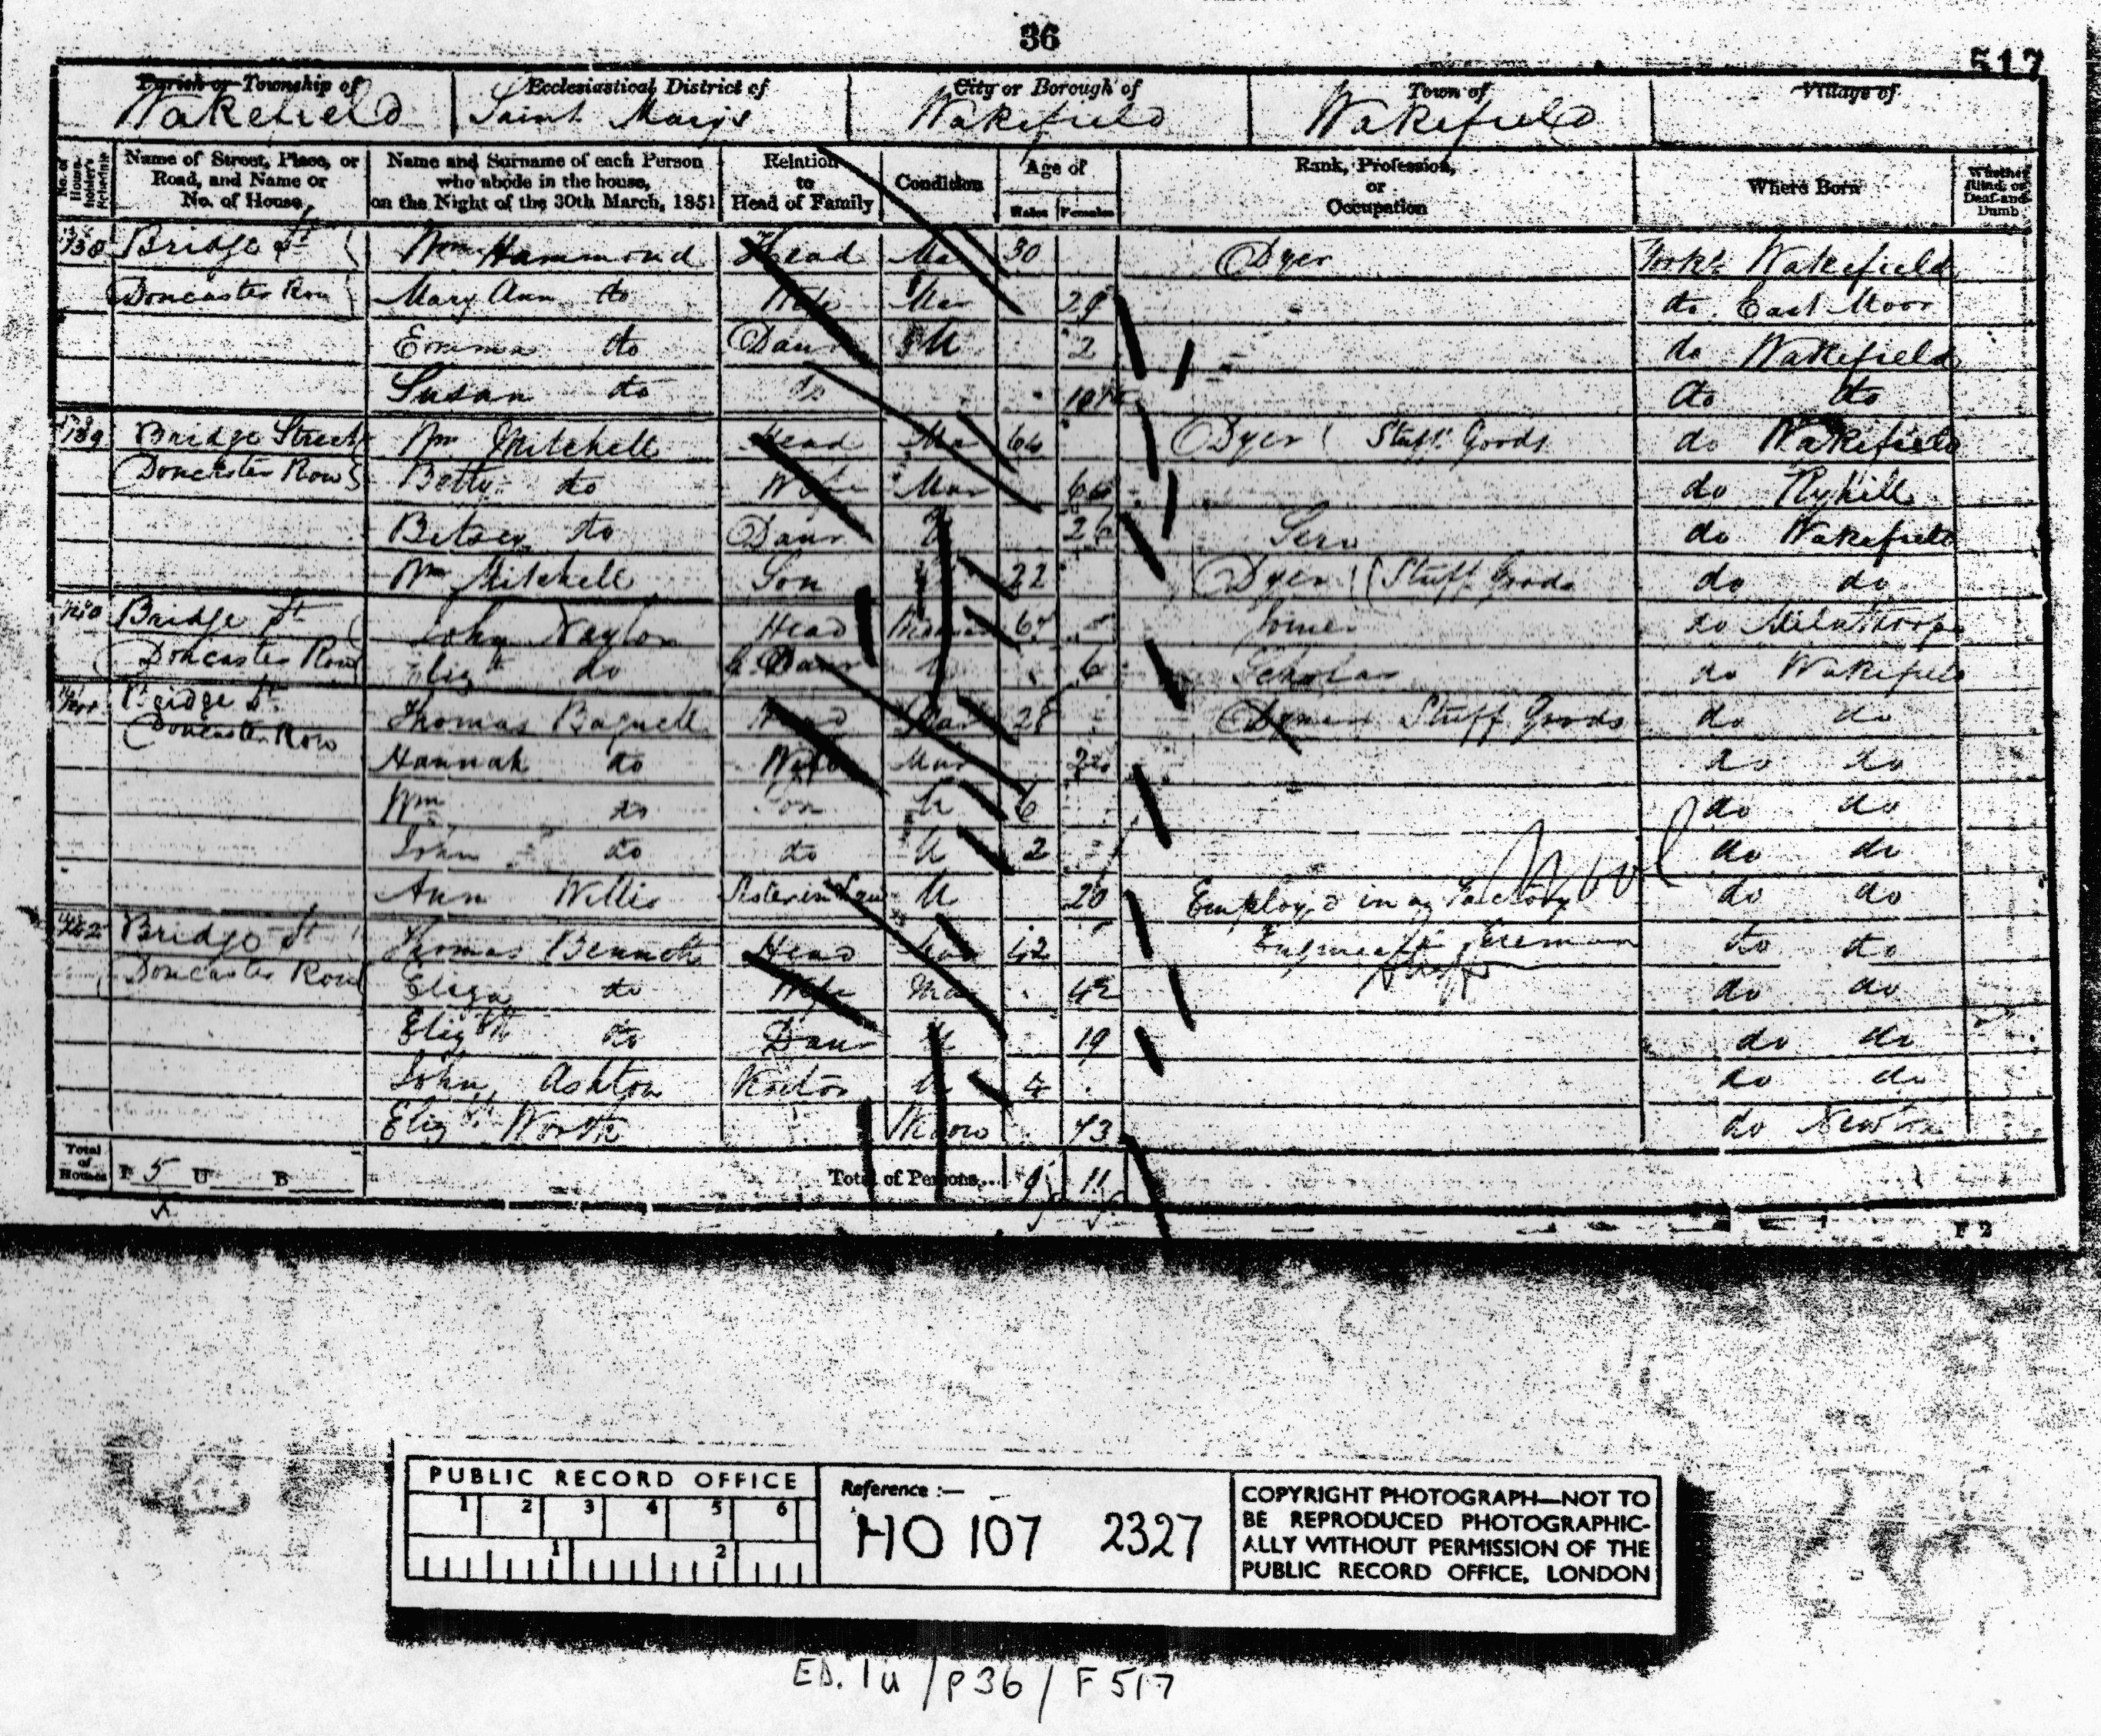 1851 Census entry for Thomas and Hannah Bagnall Household